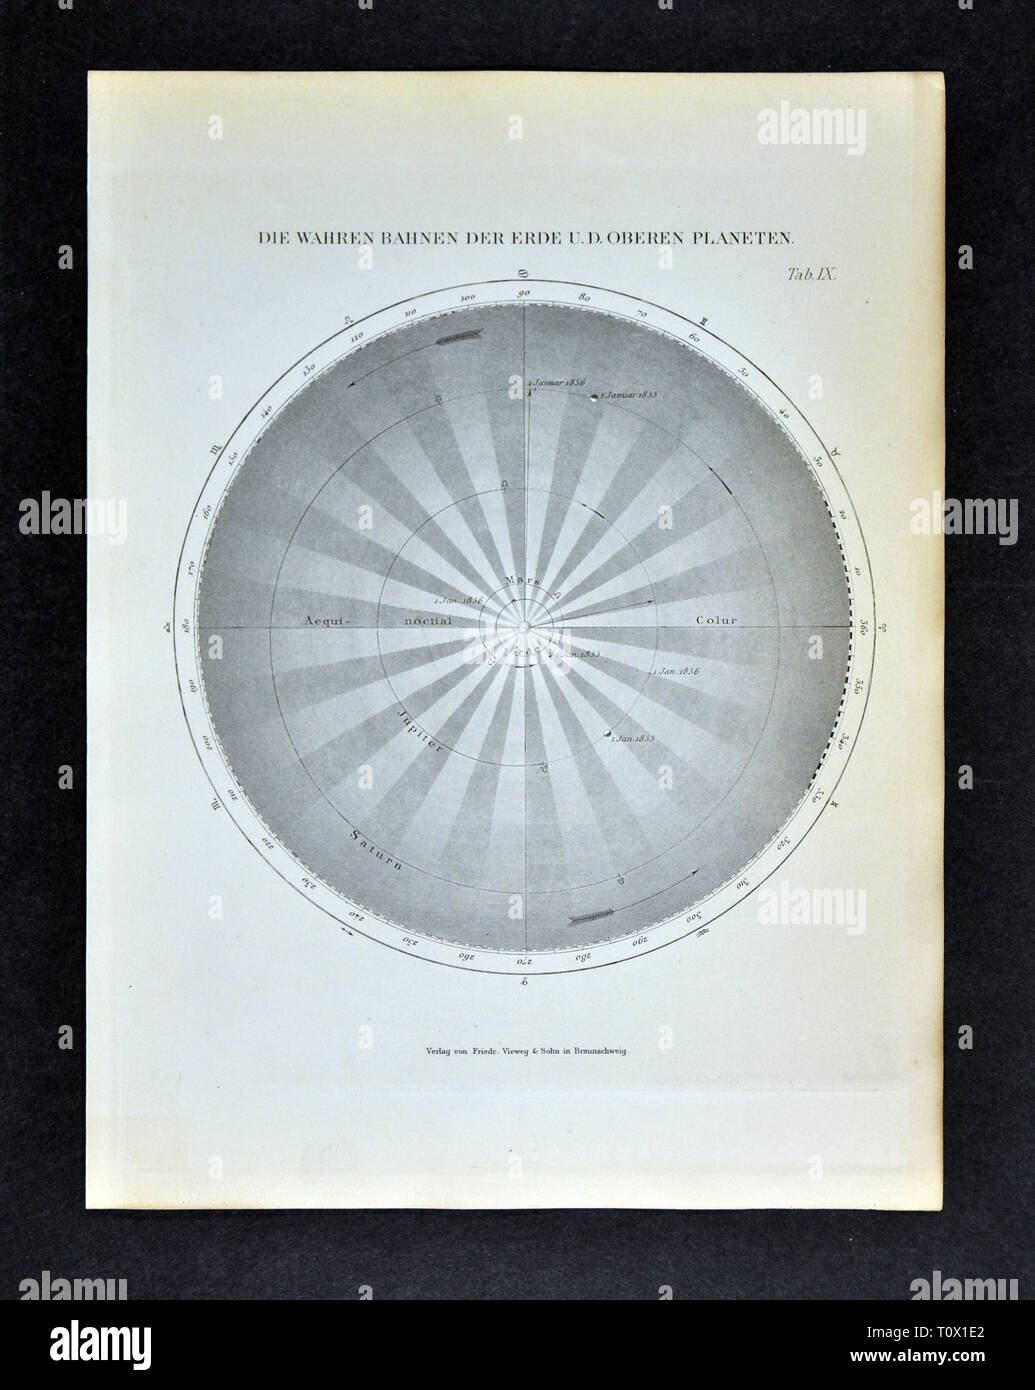 1894 Muller Astronomy Print of the Solar System showing the Orbits of the Outer Planets of Earth, Jupiter and Saturn Stock Photo